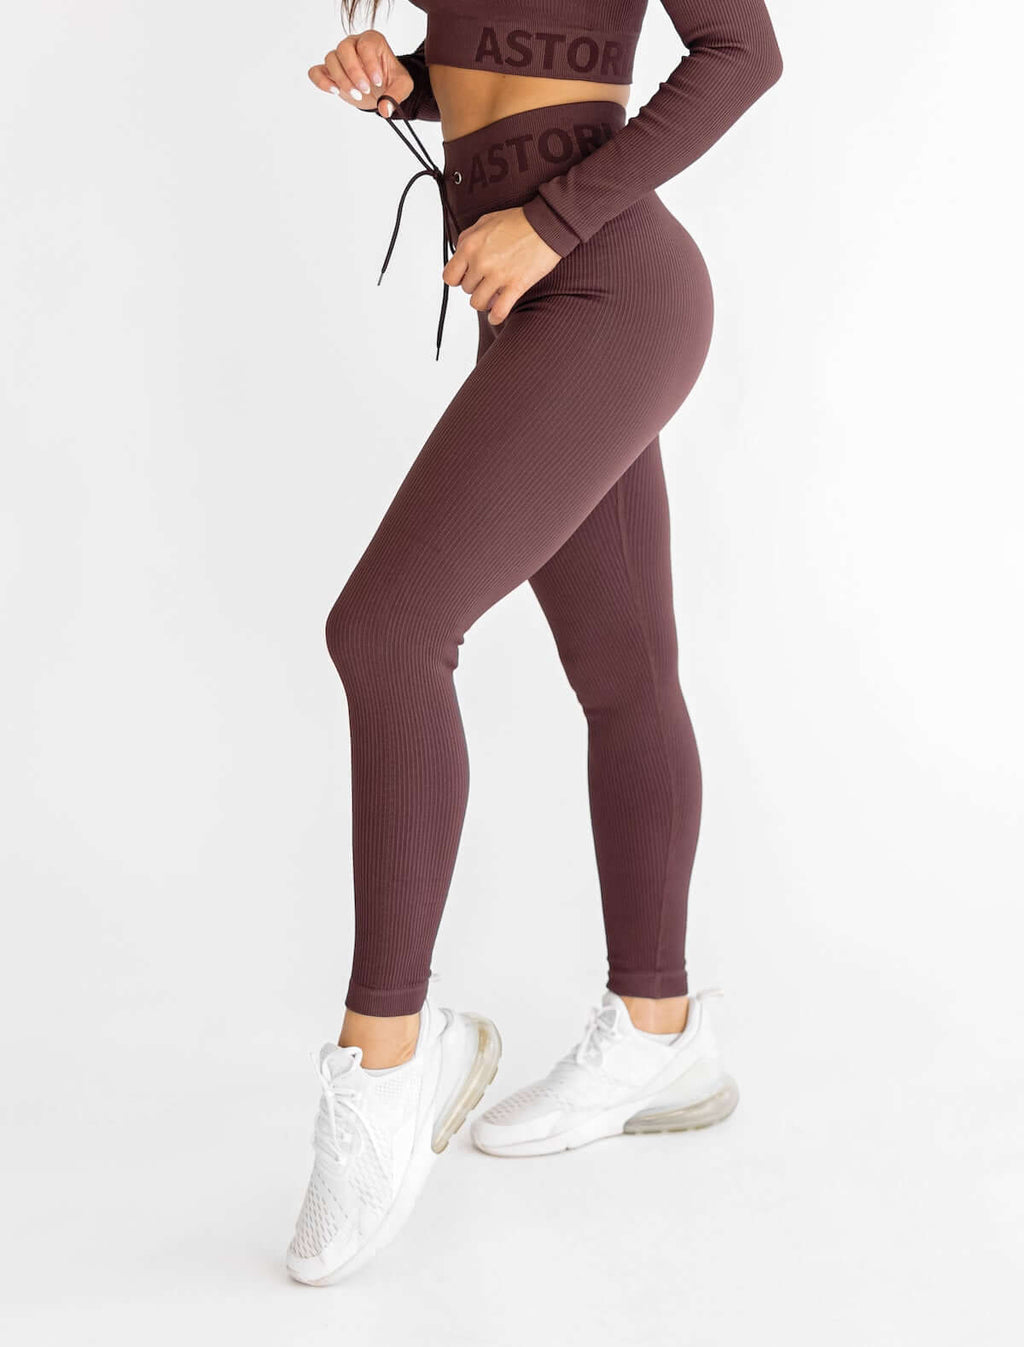 Video Review of #ASTORIA ACTIVEWEAR VELOCITY Seamless Zip Up by Miranda, 5  votes